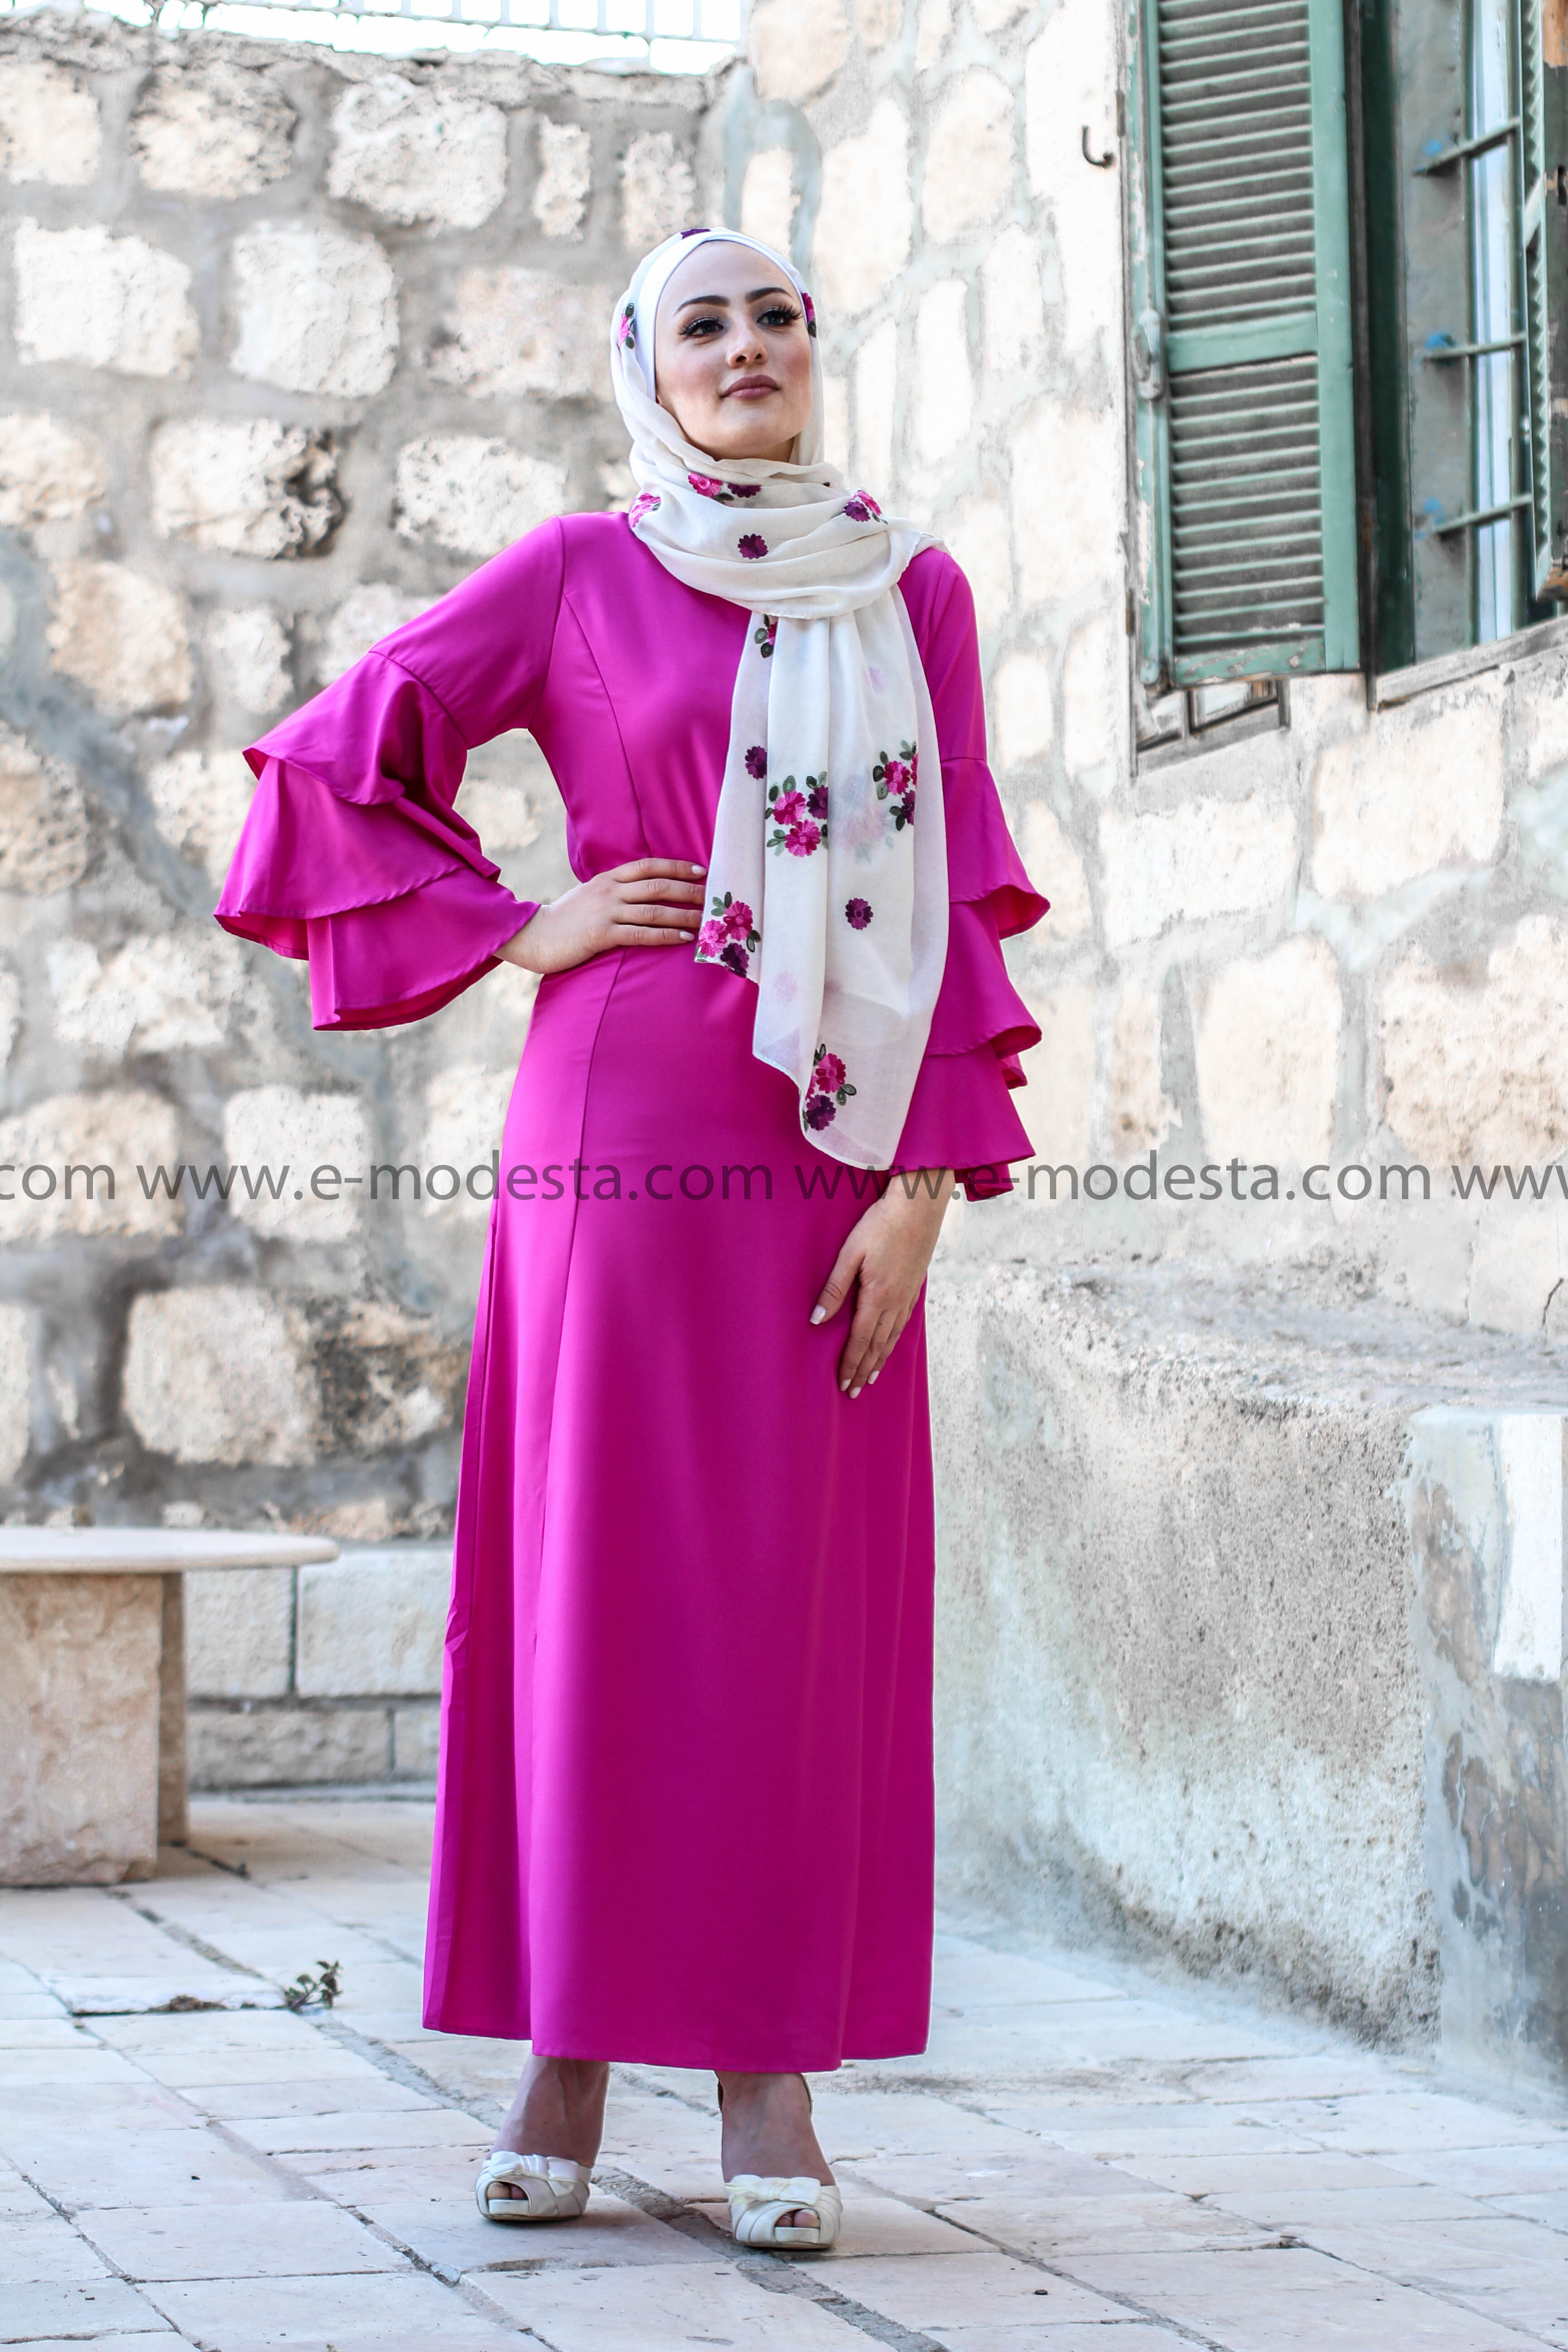 SALE | Solid Color Maxi Dress with Ruffled Sleeve - E-Modesta